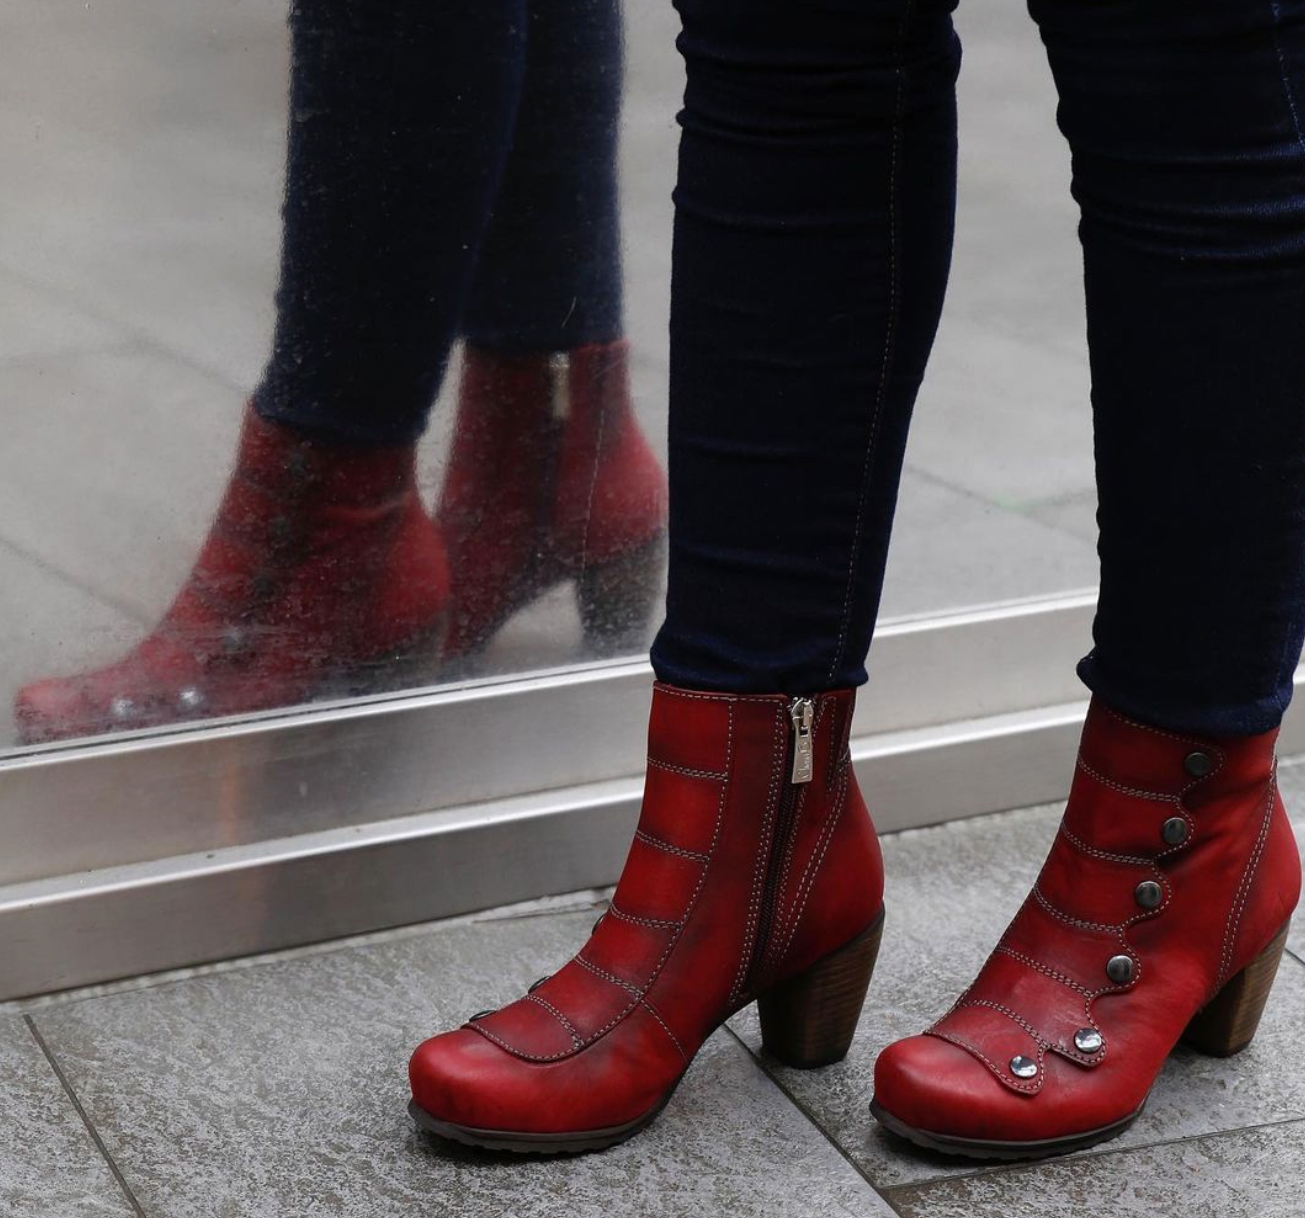 Jour - Cranberry/Grey- Ankle Boot